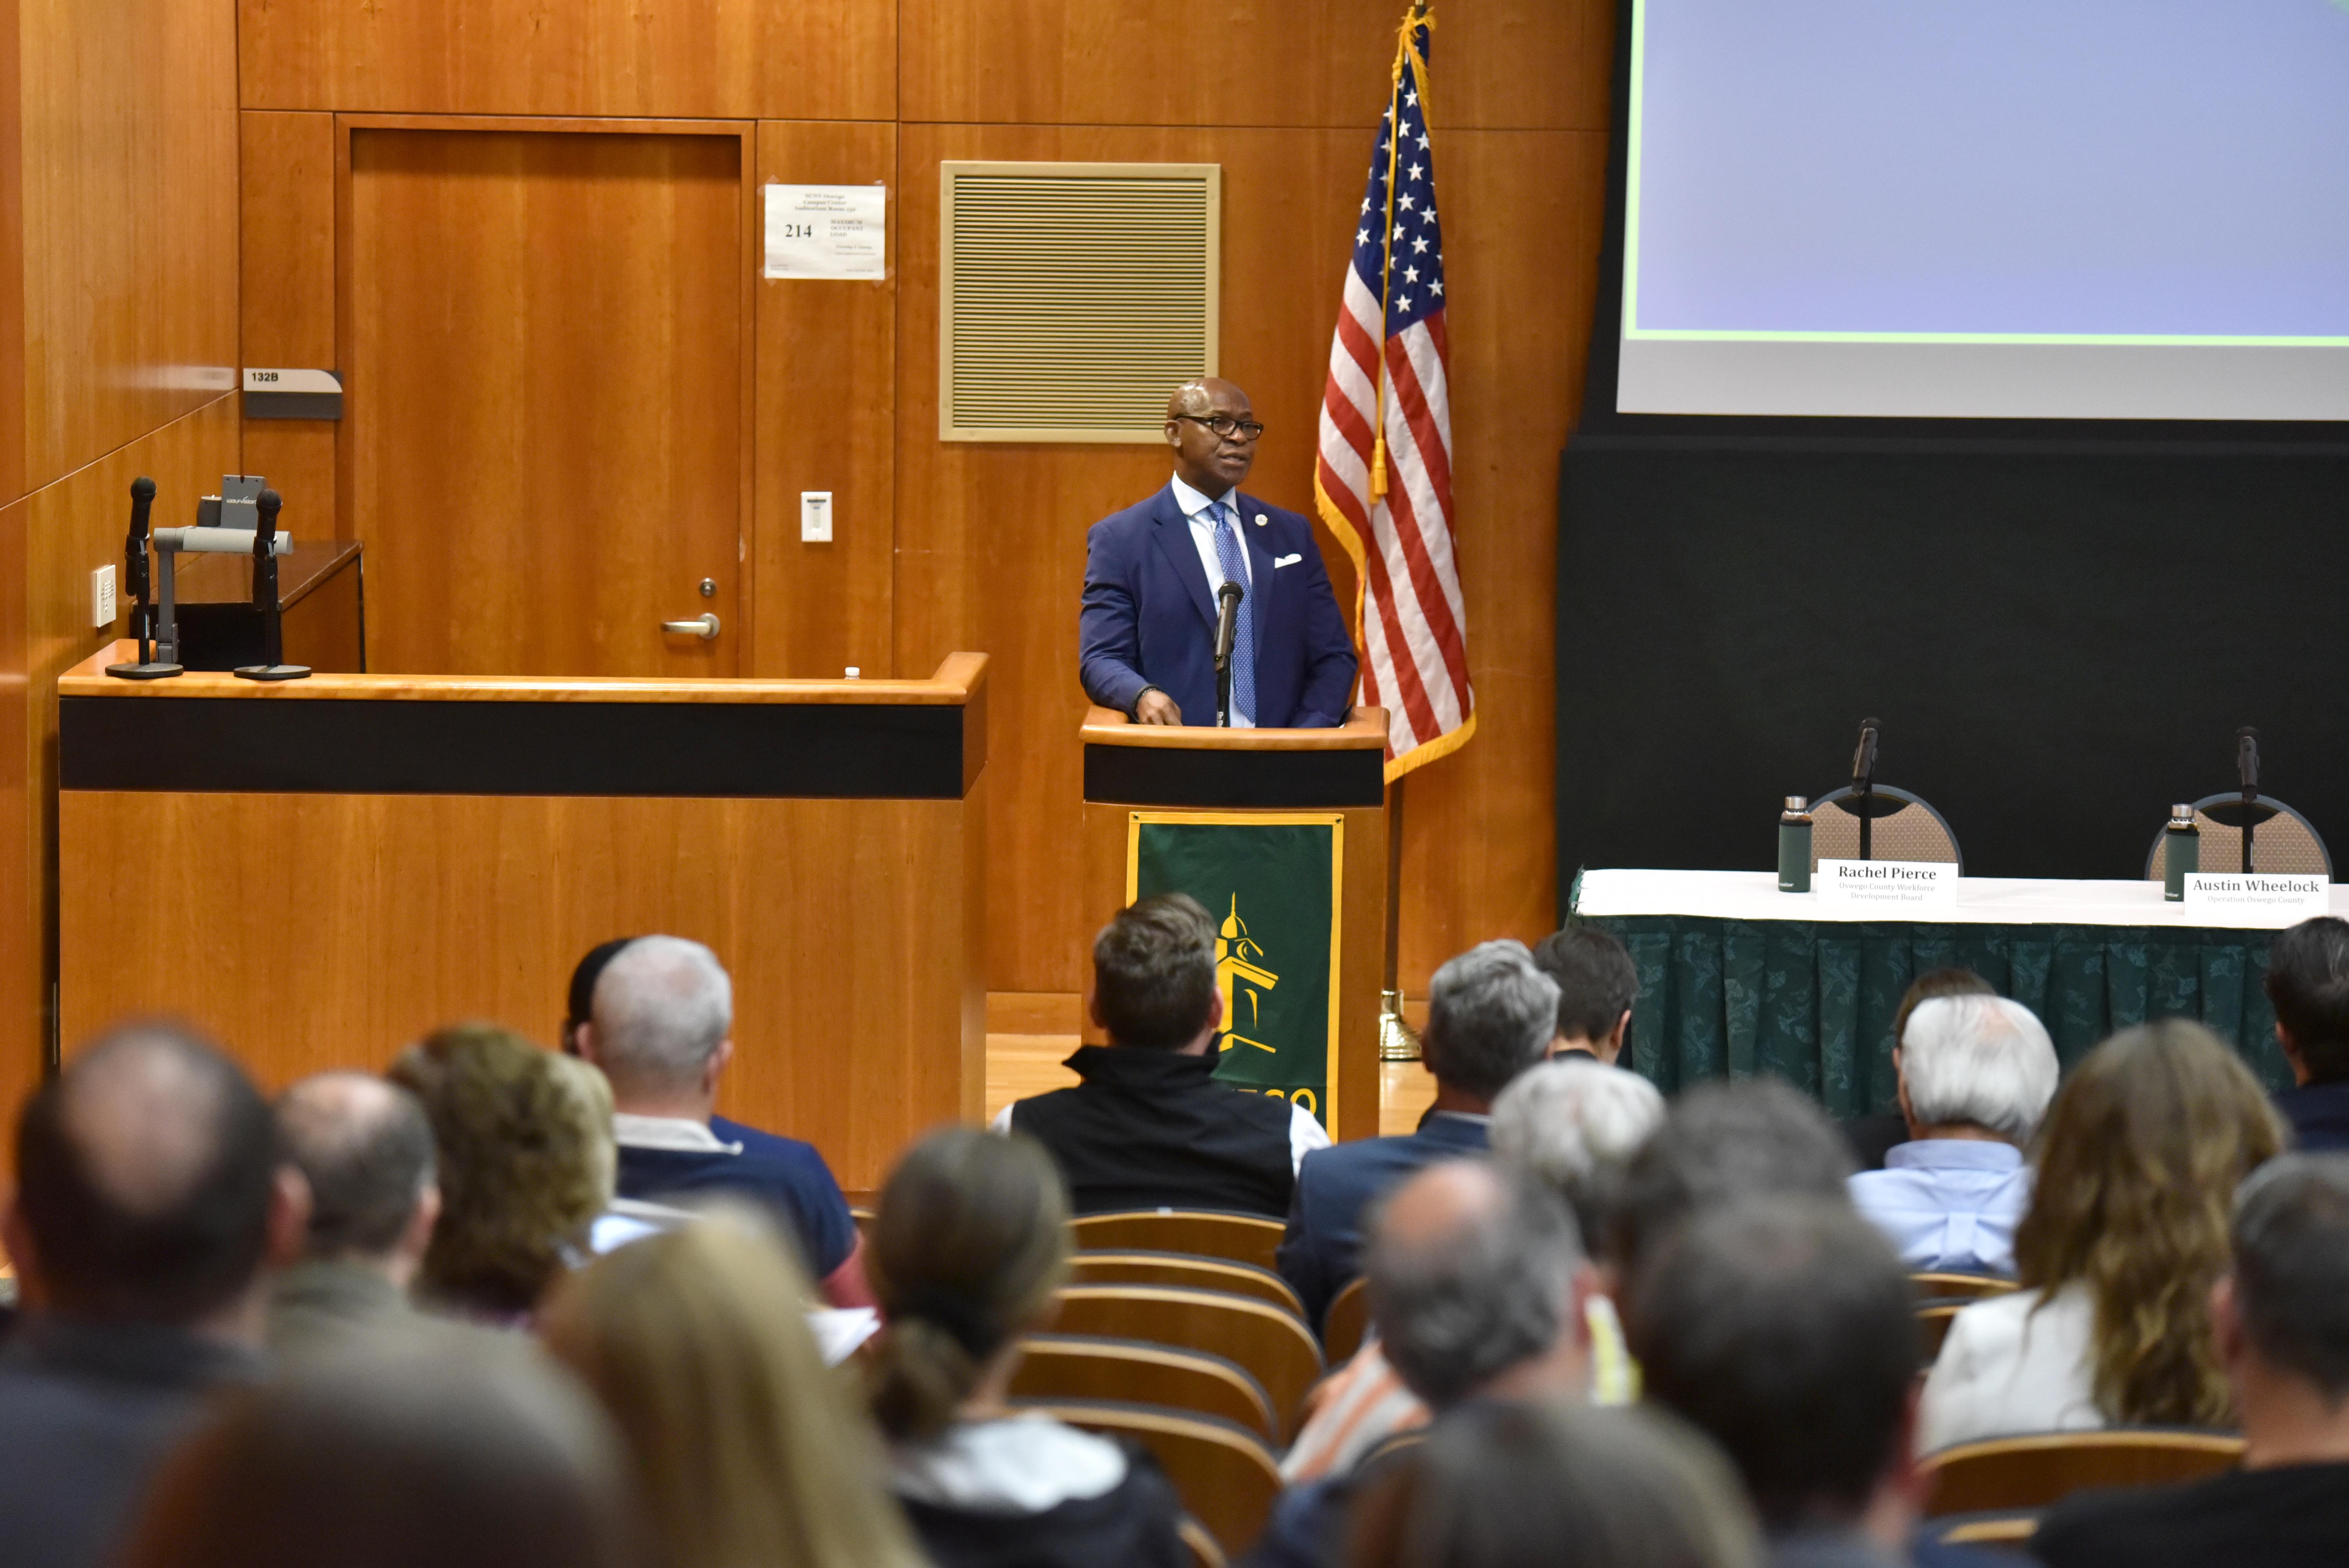 SUNY Oswego President Peter O. Nwosu, who chairs the Oswego County Micron Strategy Steering Committee, welcomes attendees to the committee's inaugural annual summit.